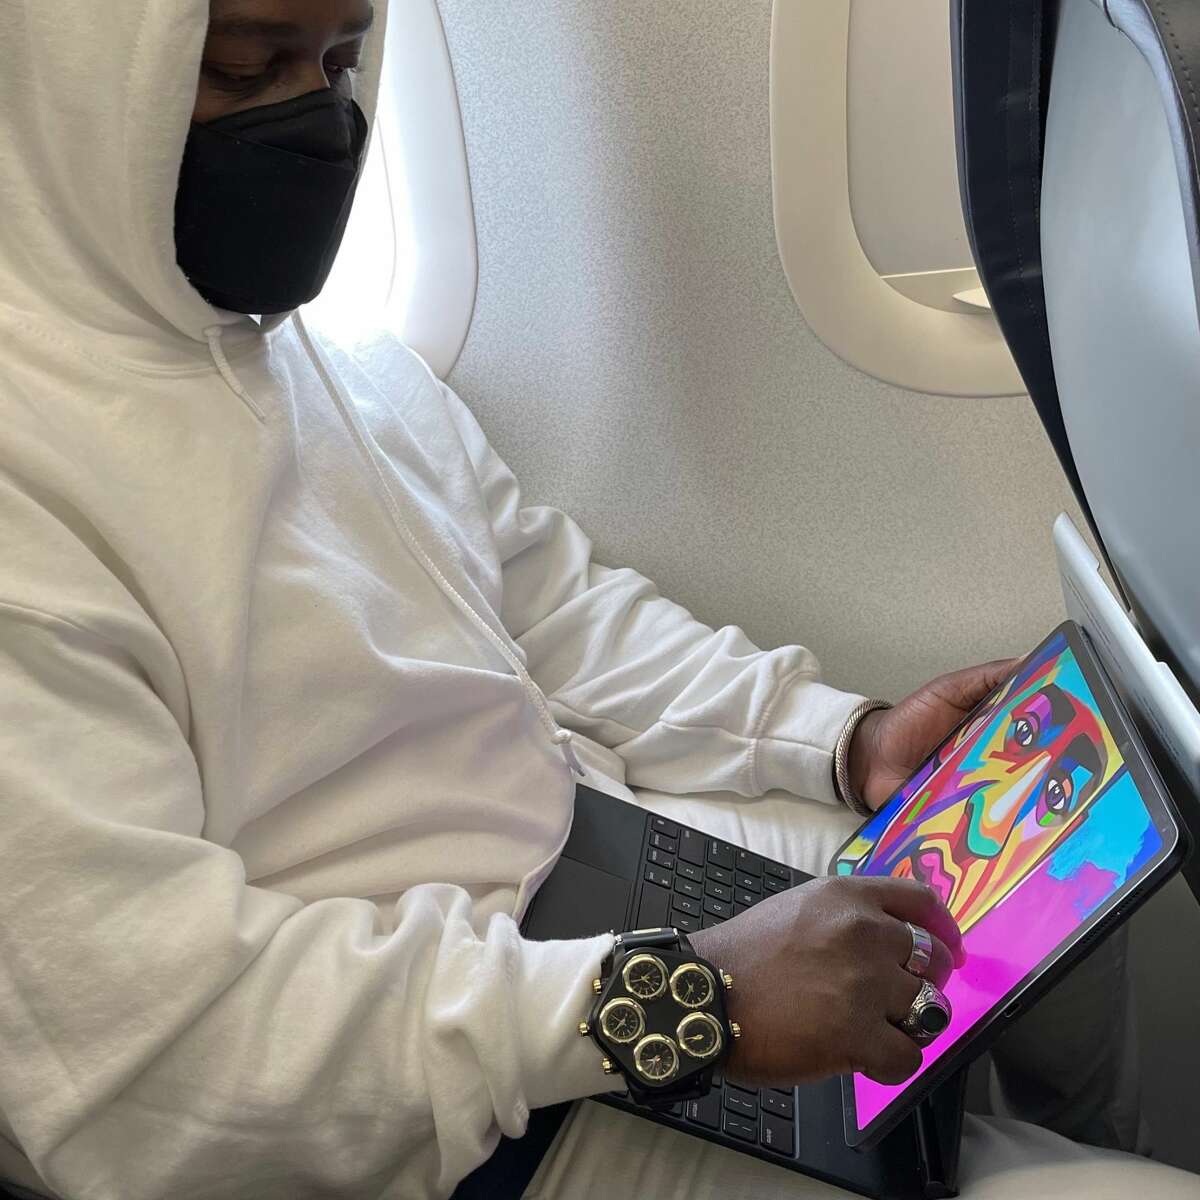 Houston-based artist Ange Hillz painted this week's cover of TIME in 24 hours on his iPad during a flight to Minneapolis for Daunte Wright's funeral.